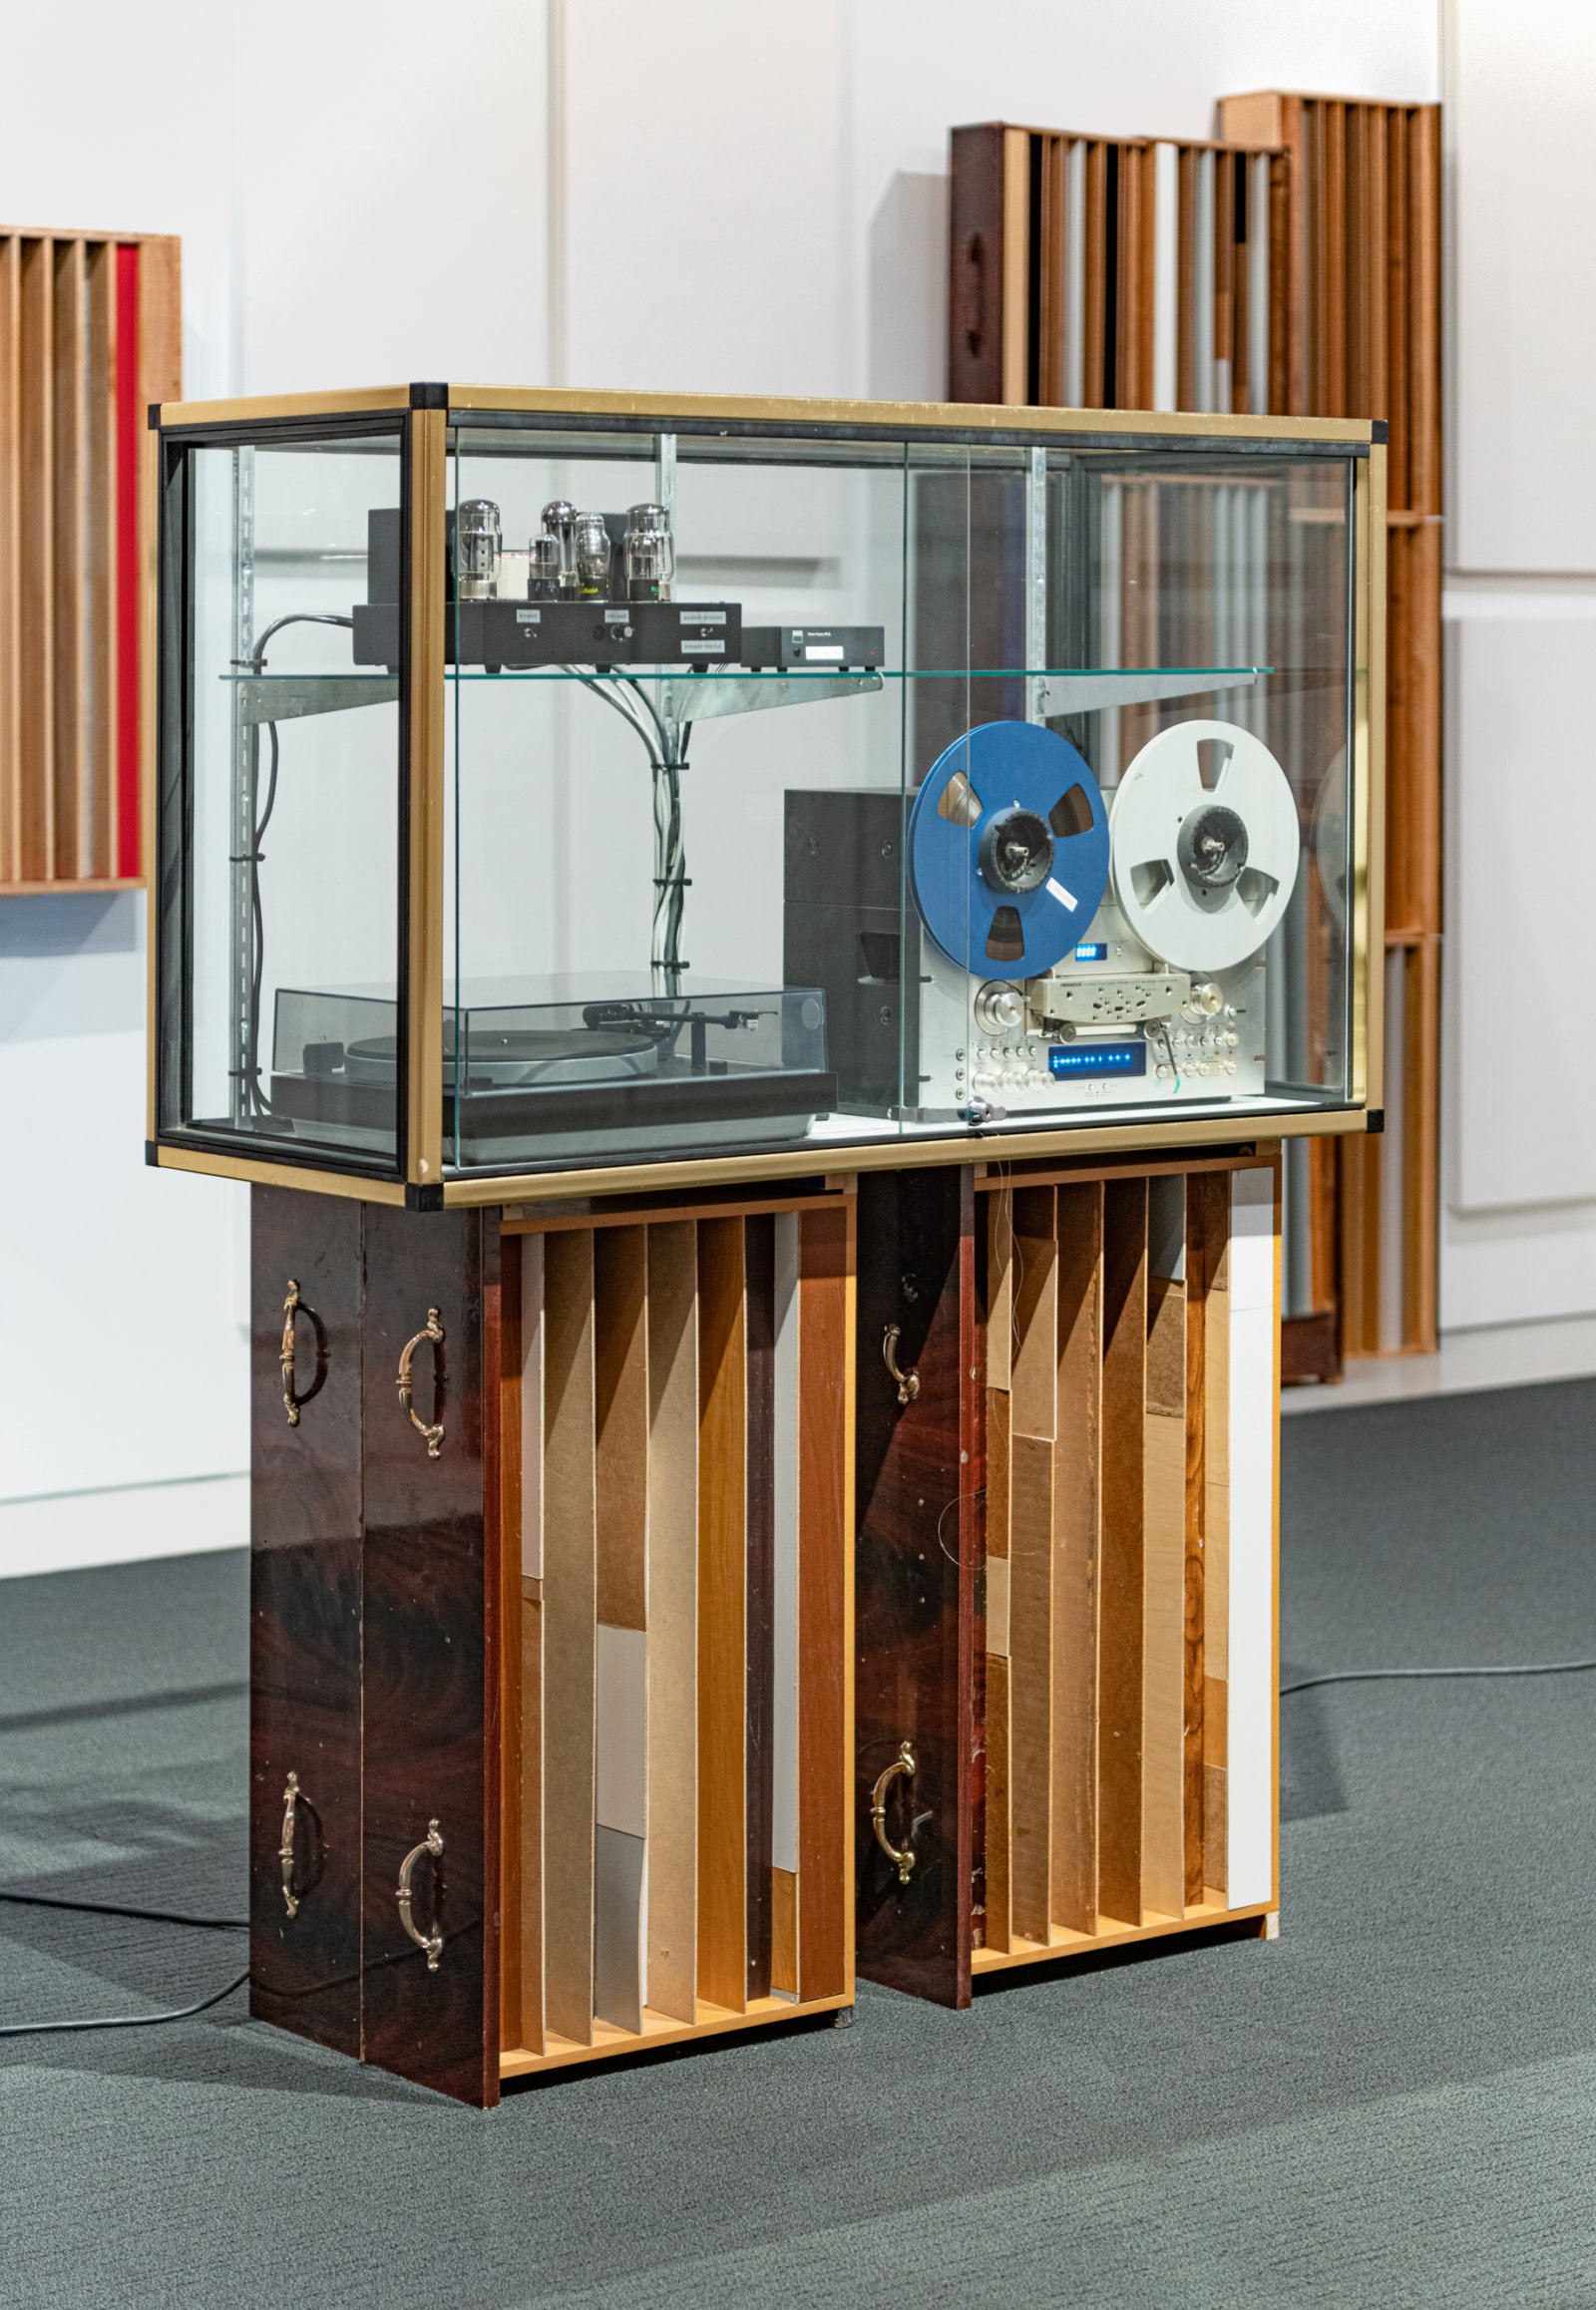 Kevin Schmidt, Enclosures, 2022, glass cabinet, discarded furniture, console, reel-to-reel player, field recording, 48 x 36 x 18 in. (122 x 91 x 46 cm). Installation view, Public Address System, Musée d’art de Joliette, Canada, 2022